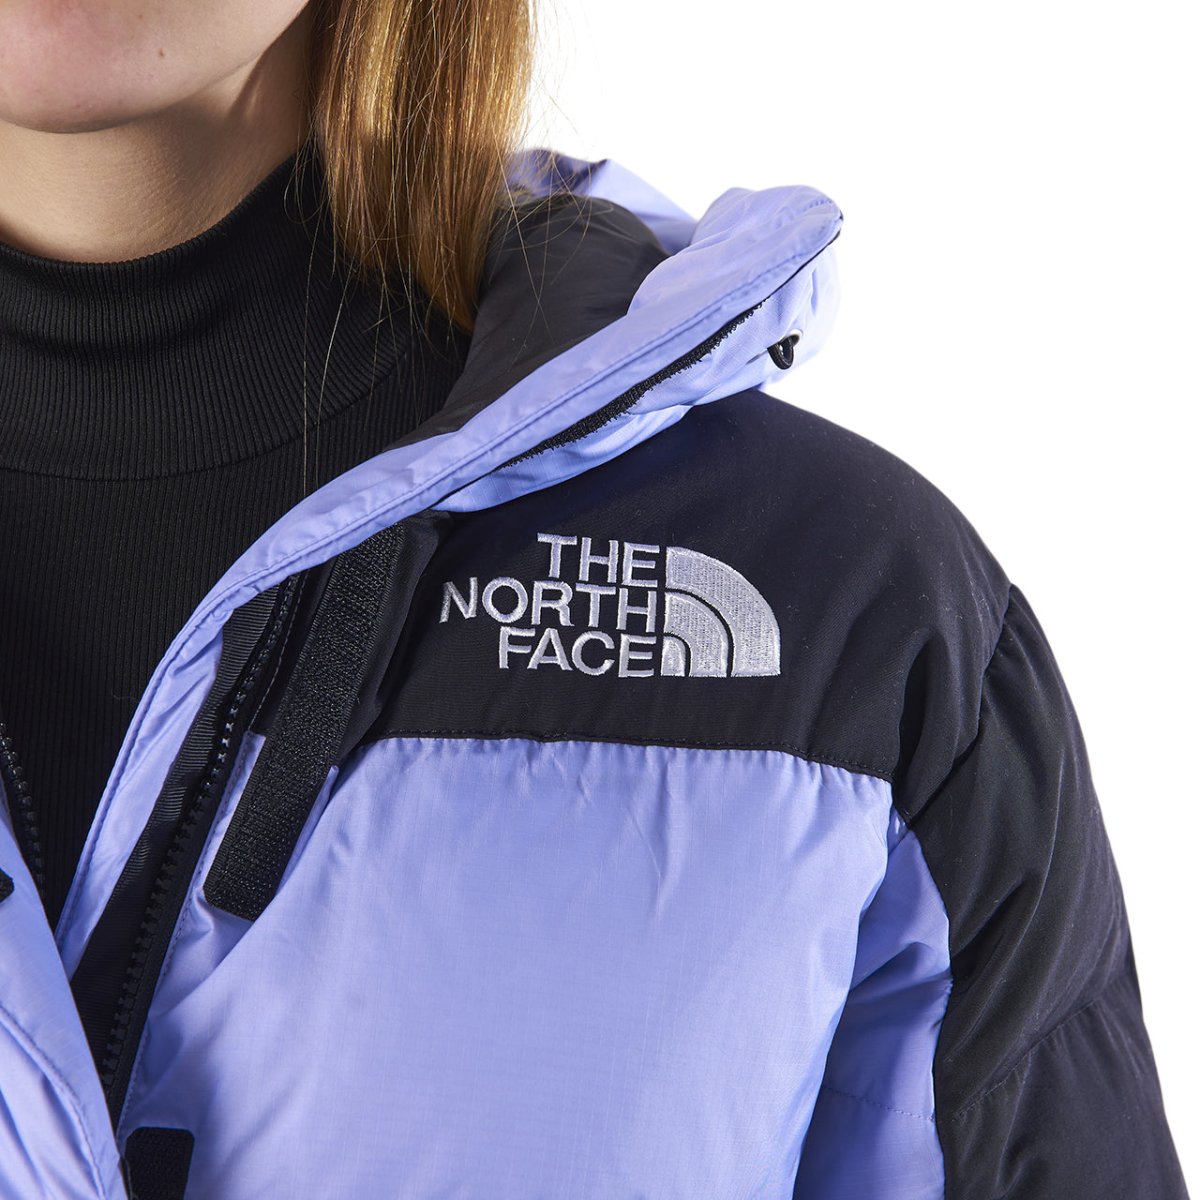 The North Face WMNS Himalayan Down Parka (Flieder / Schwarz)  - Allike Store